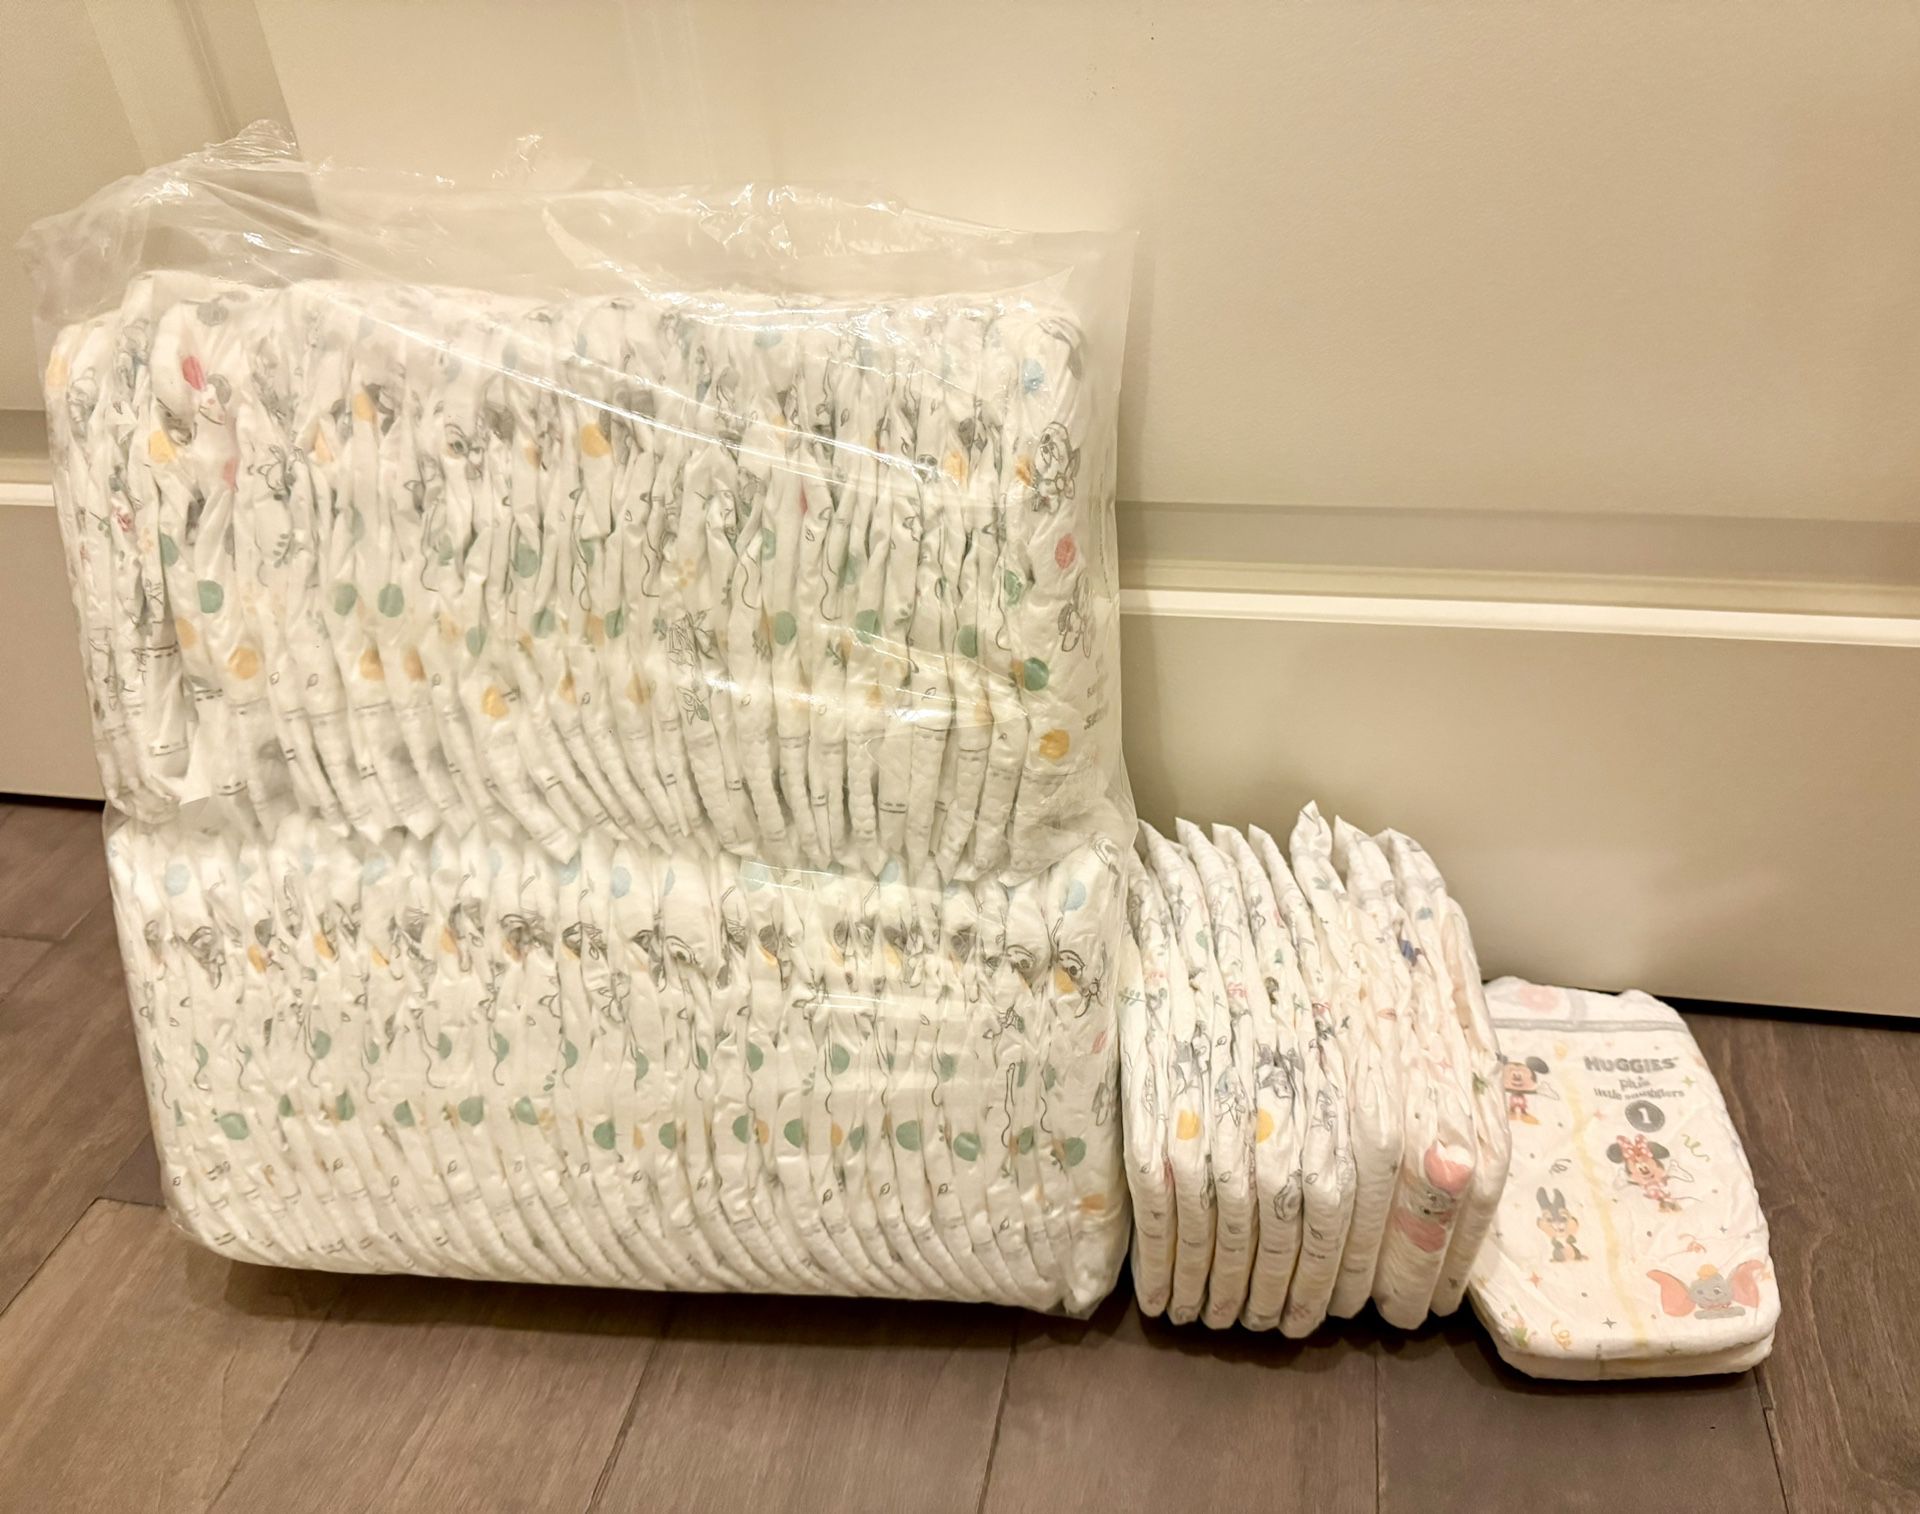 New Huggies Plus Snugglers Size 1 Diapers For Baby